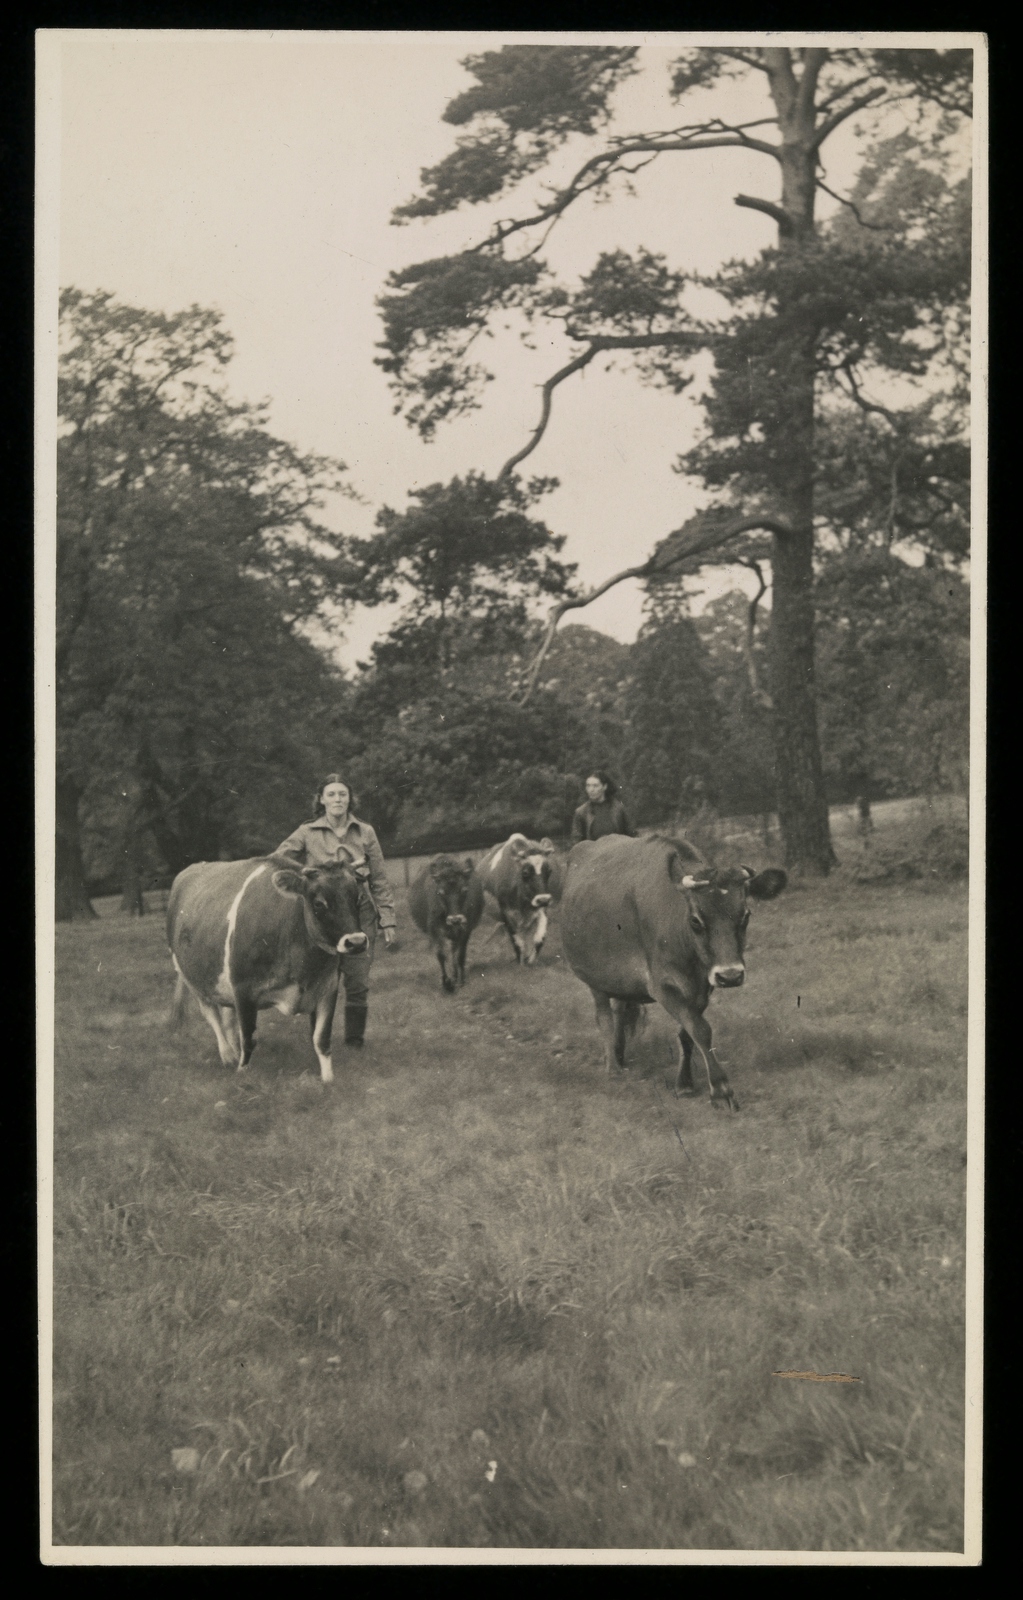 Black and white photograph showing two women leading four cows through a field.